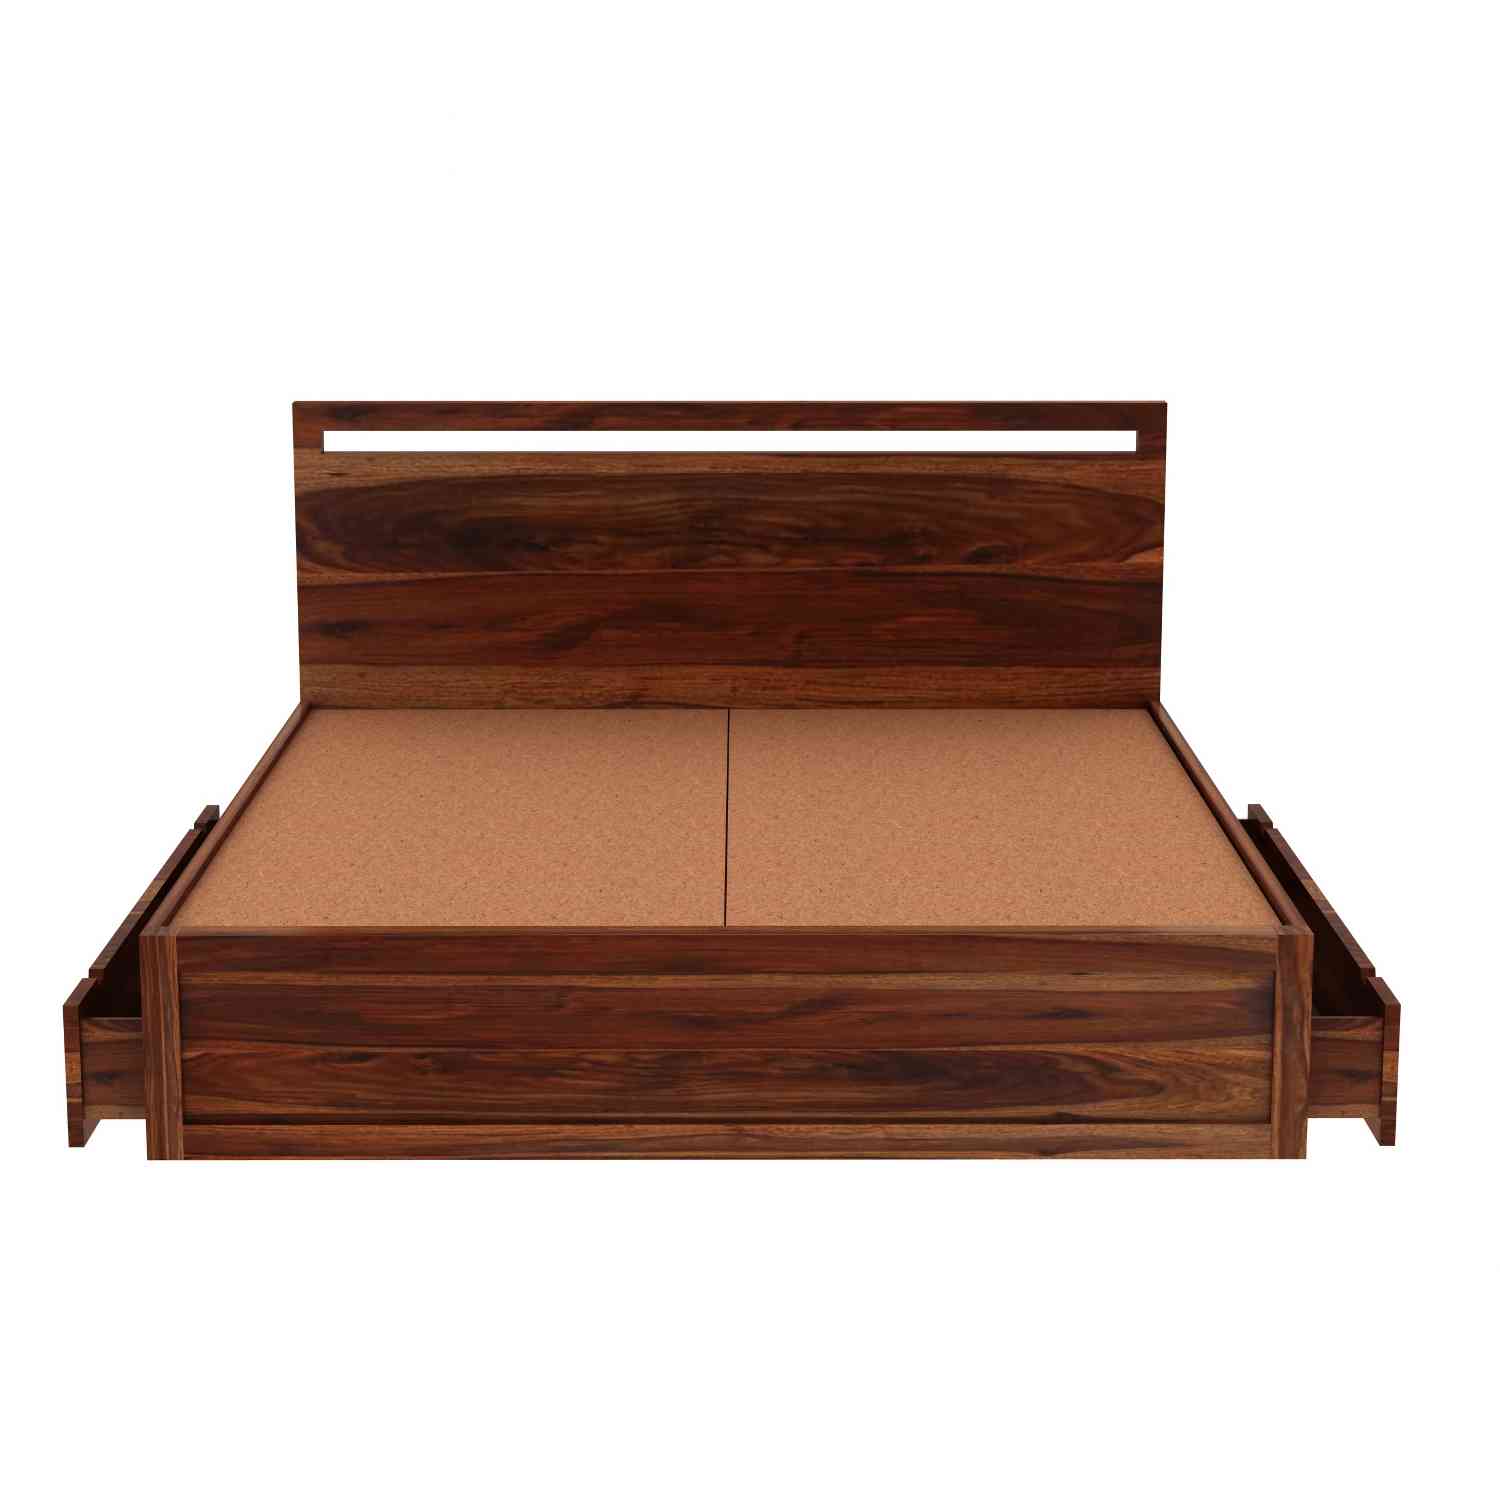 Livinn Solid Sheesham Wood Bed With Two Drawers (King Size, Natural Finish)